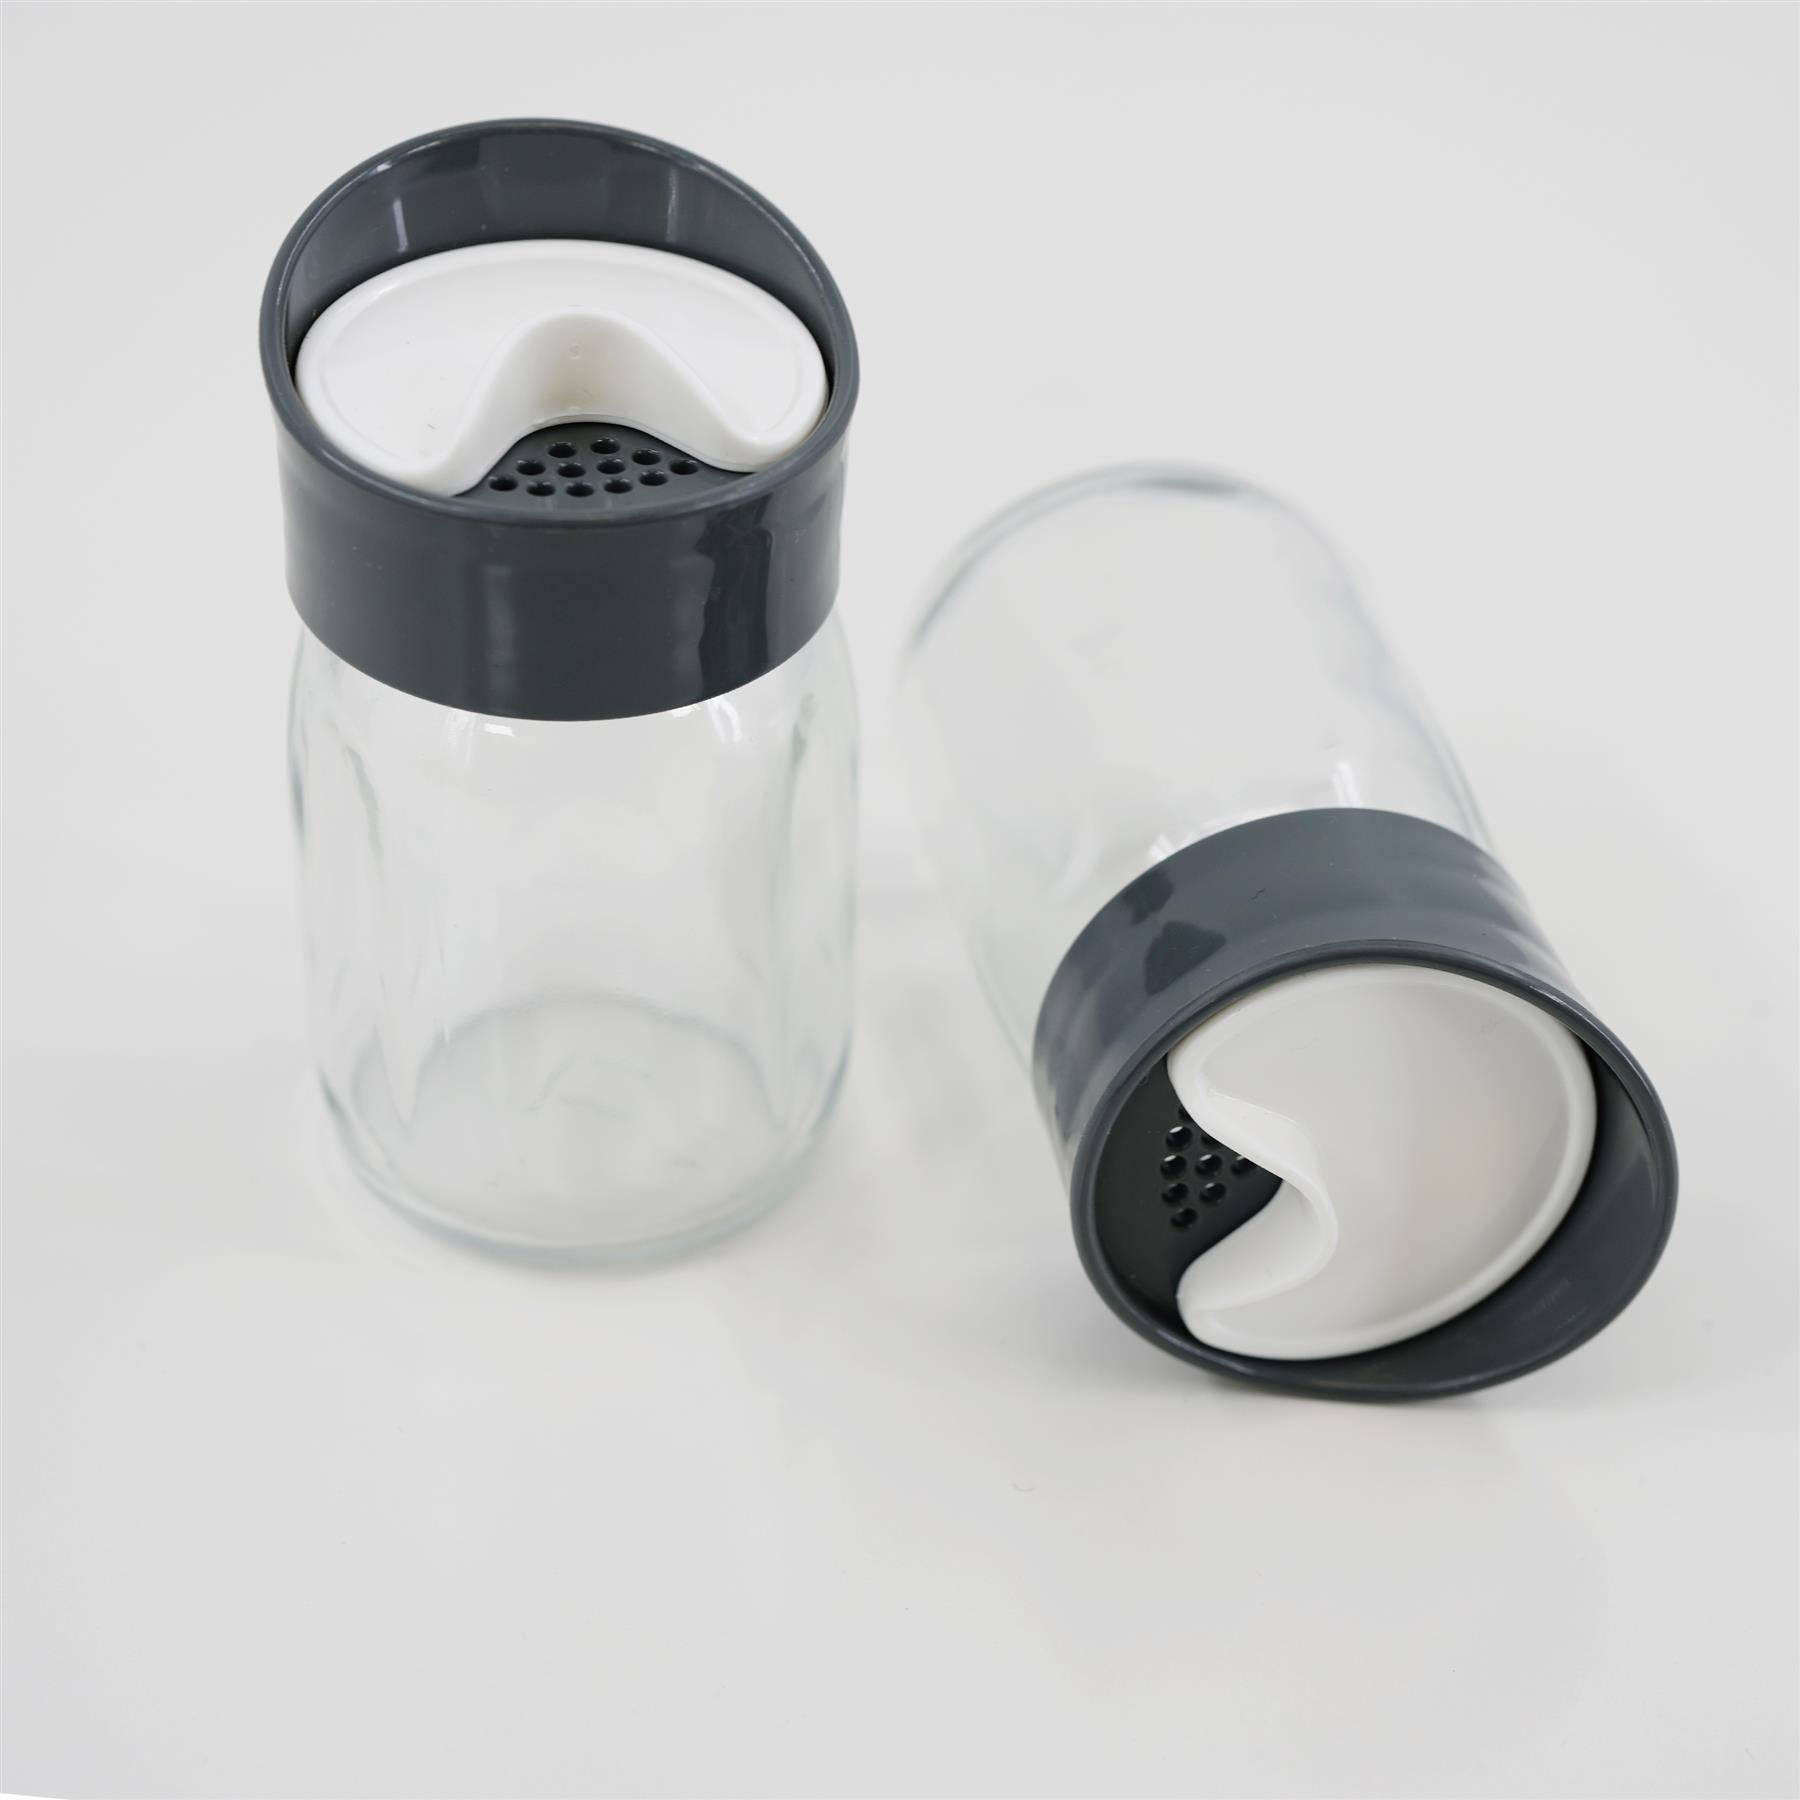 Salt and Pepper Shaker Set / Salt and Pepper Pots With Holder by Geezy - The Magic Toy Shop